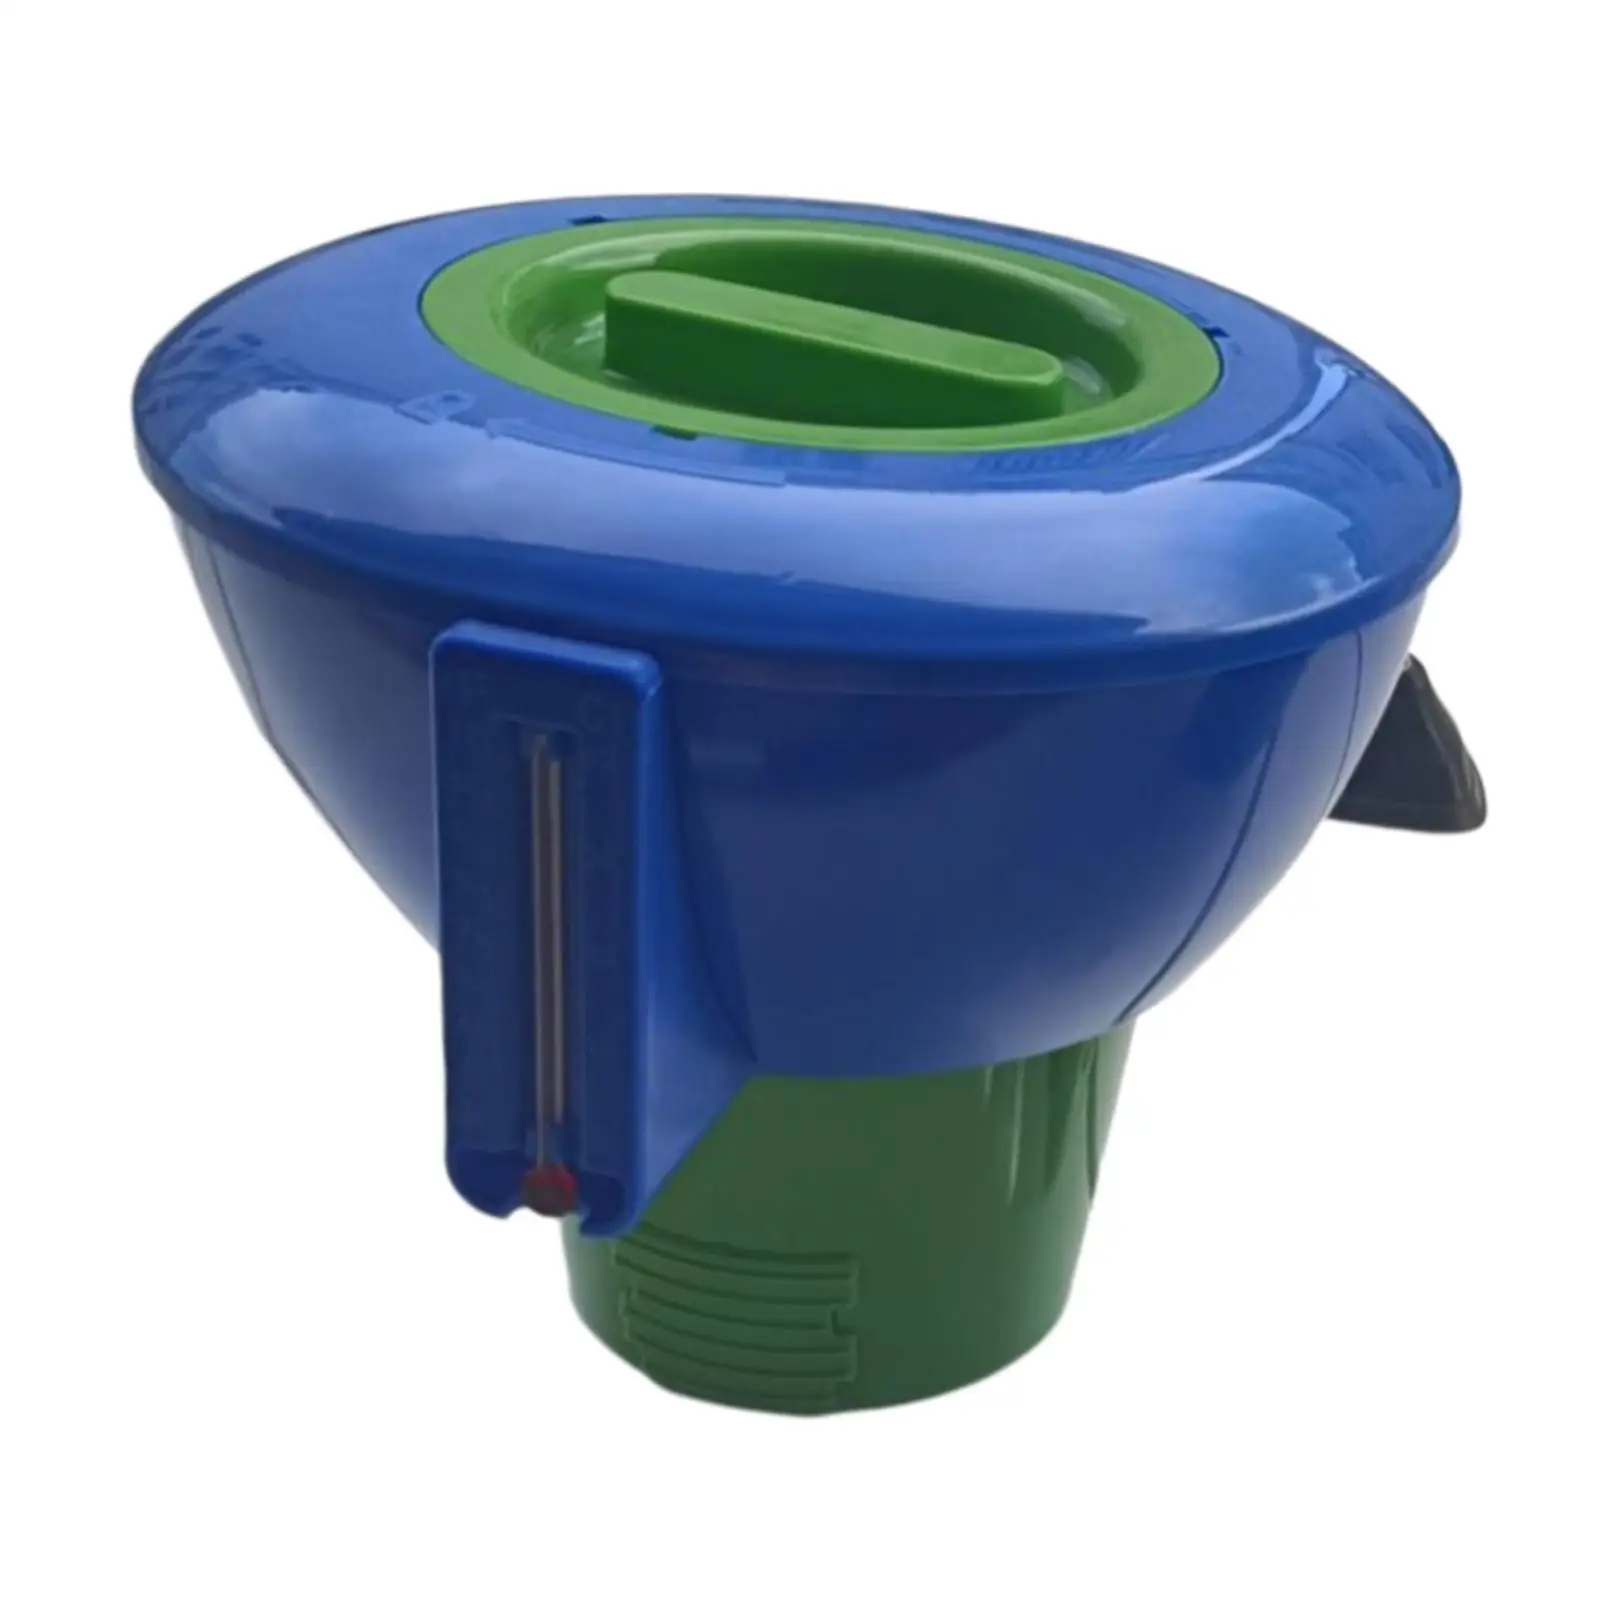 Floating Pool  Bromine Chlorine Dispenser, with ,  Swimming Pools, Up to 8